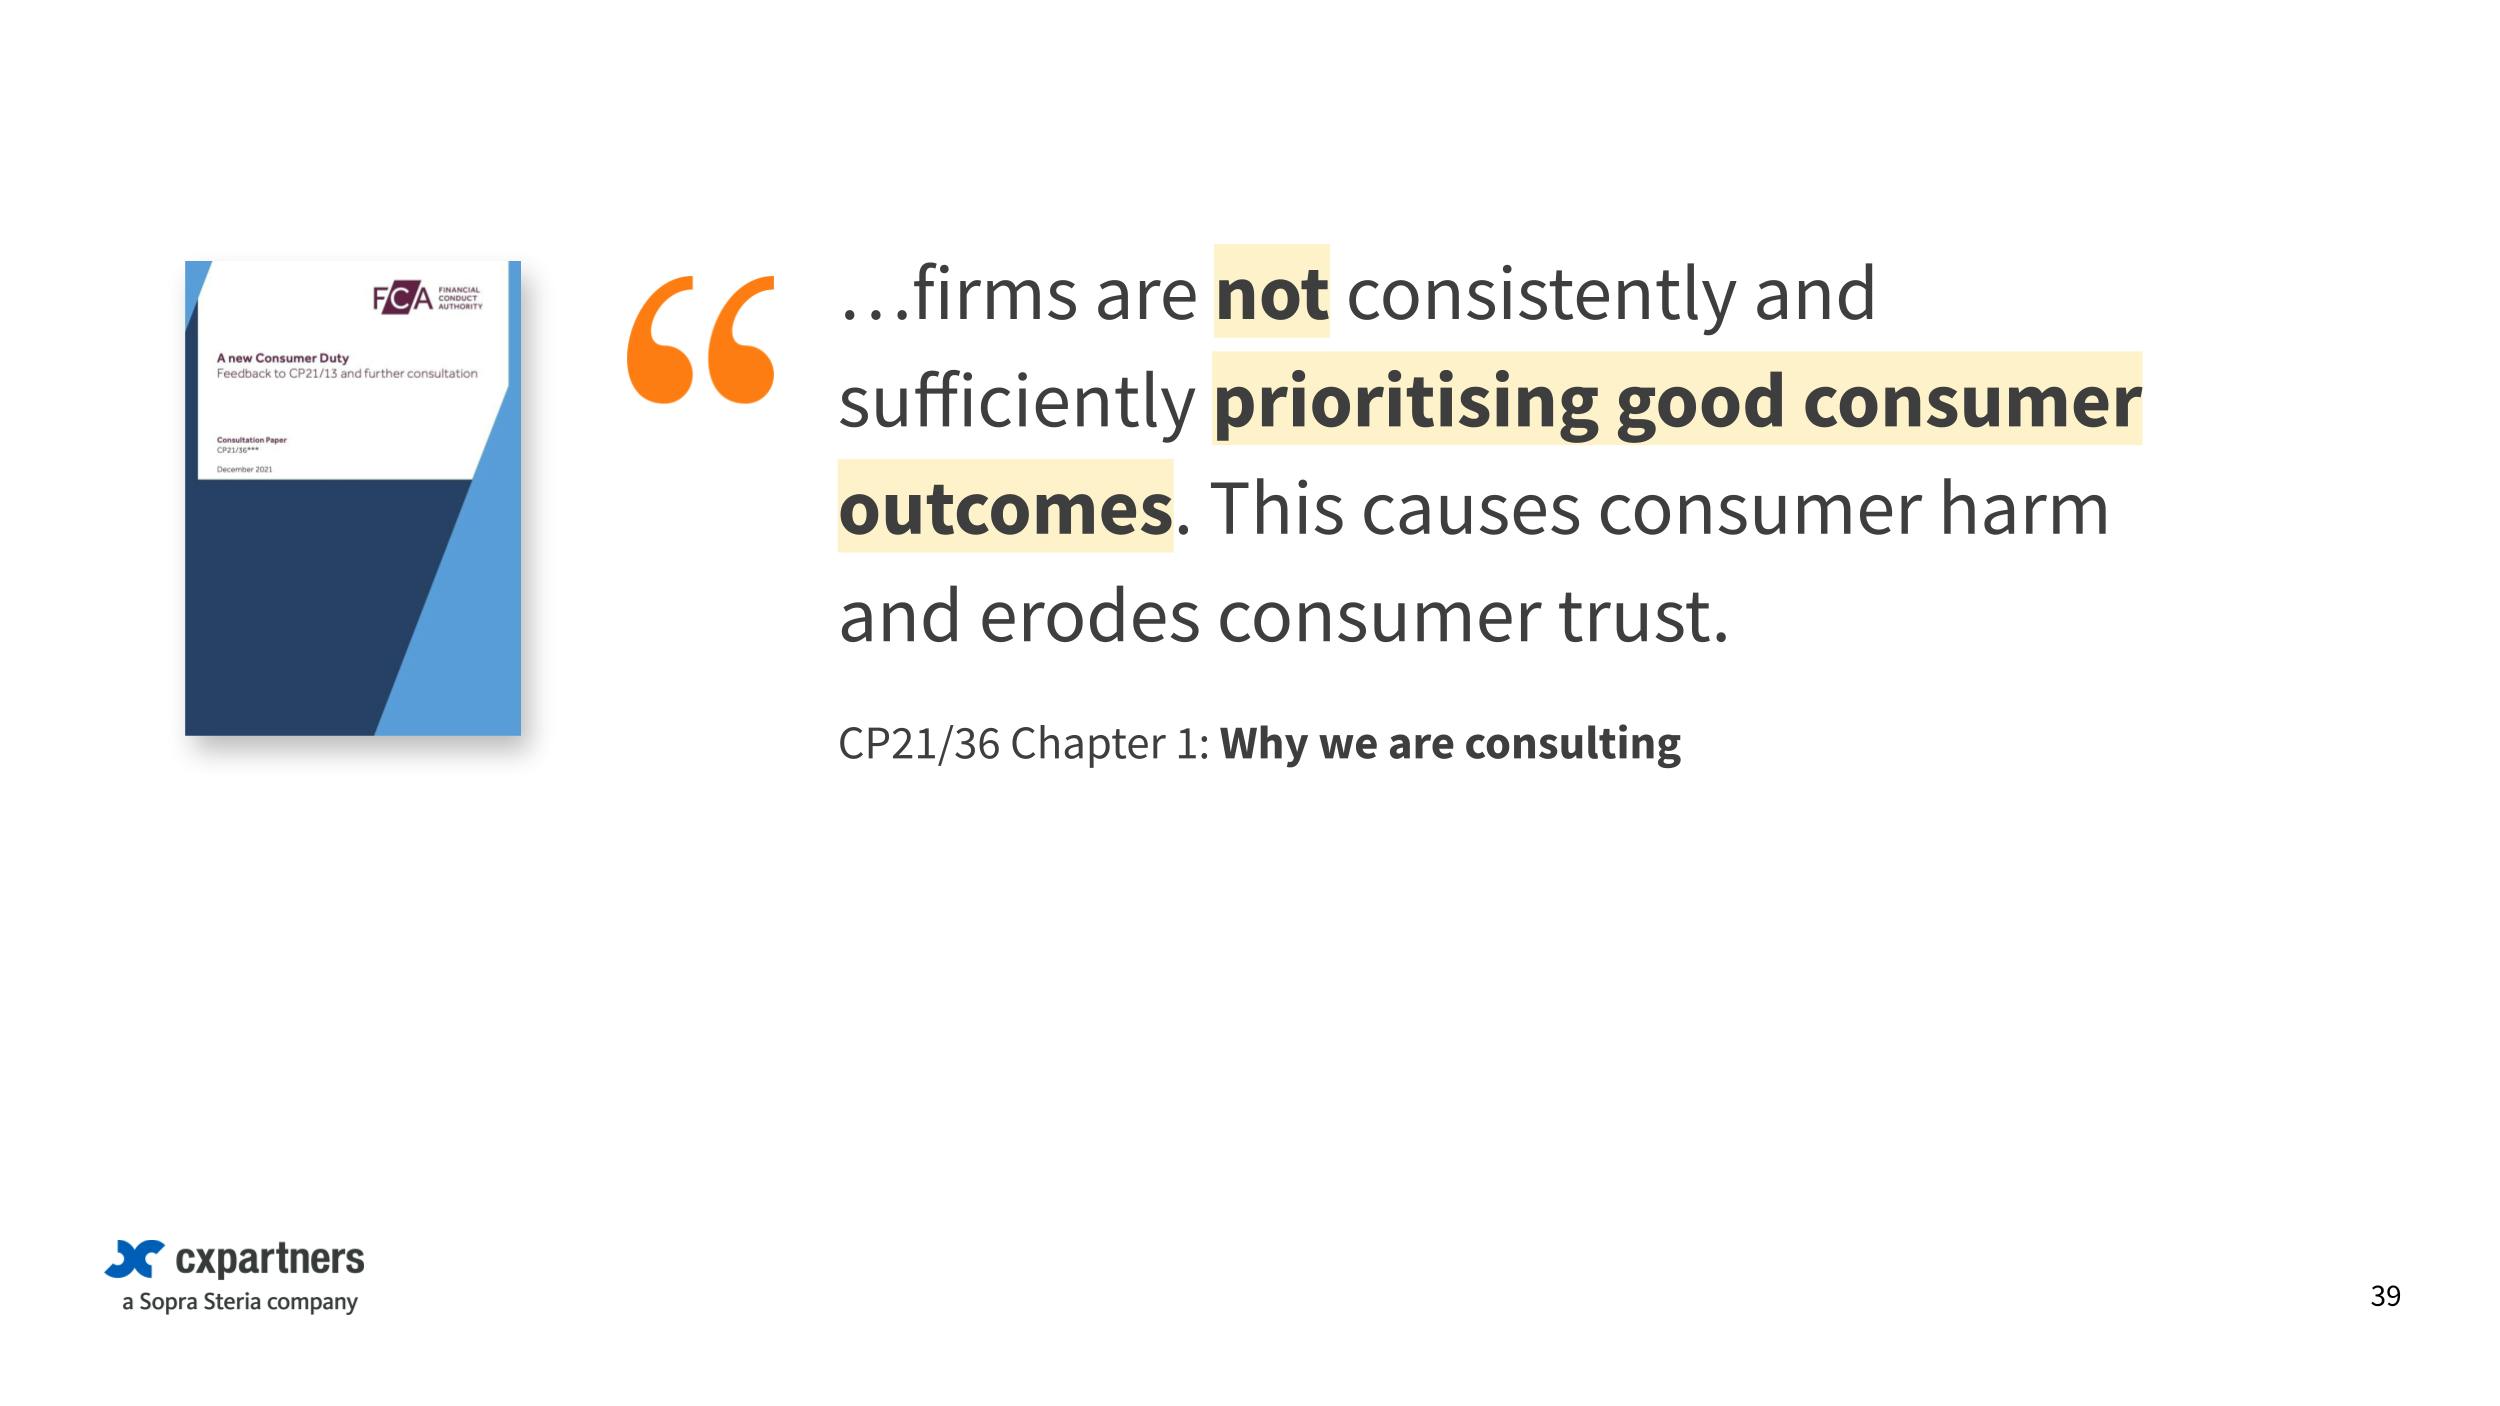 Chapter 1 of the FCA's consultation paper (CP21/36) is titled "Why we are consulting" and states that "…firms are not consistently and sufficiently prioritising good consumer outcomes. This causes consumer harm and erodes consumer trust." 